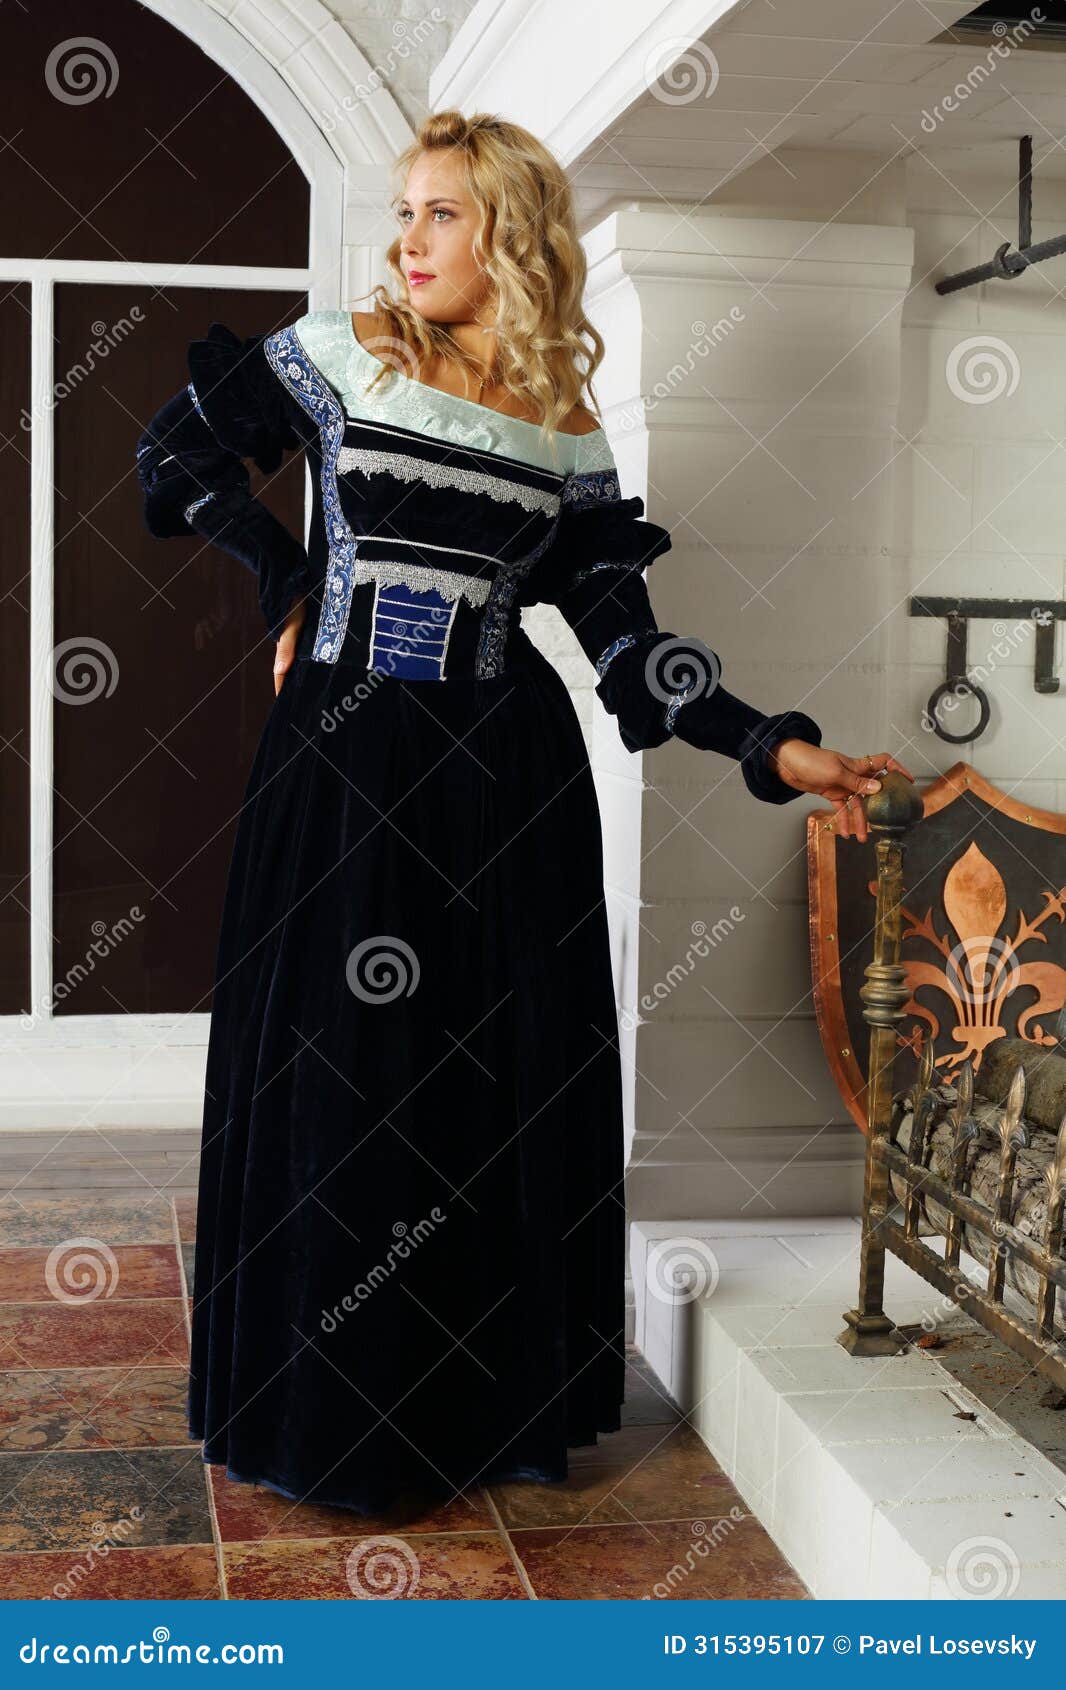 beautiful woman in medieval costume stands near